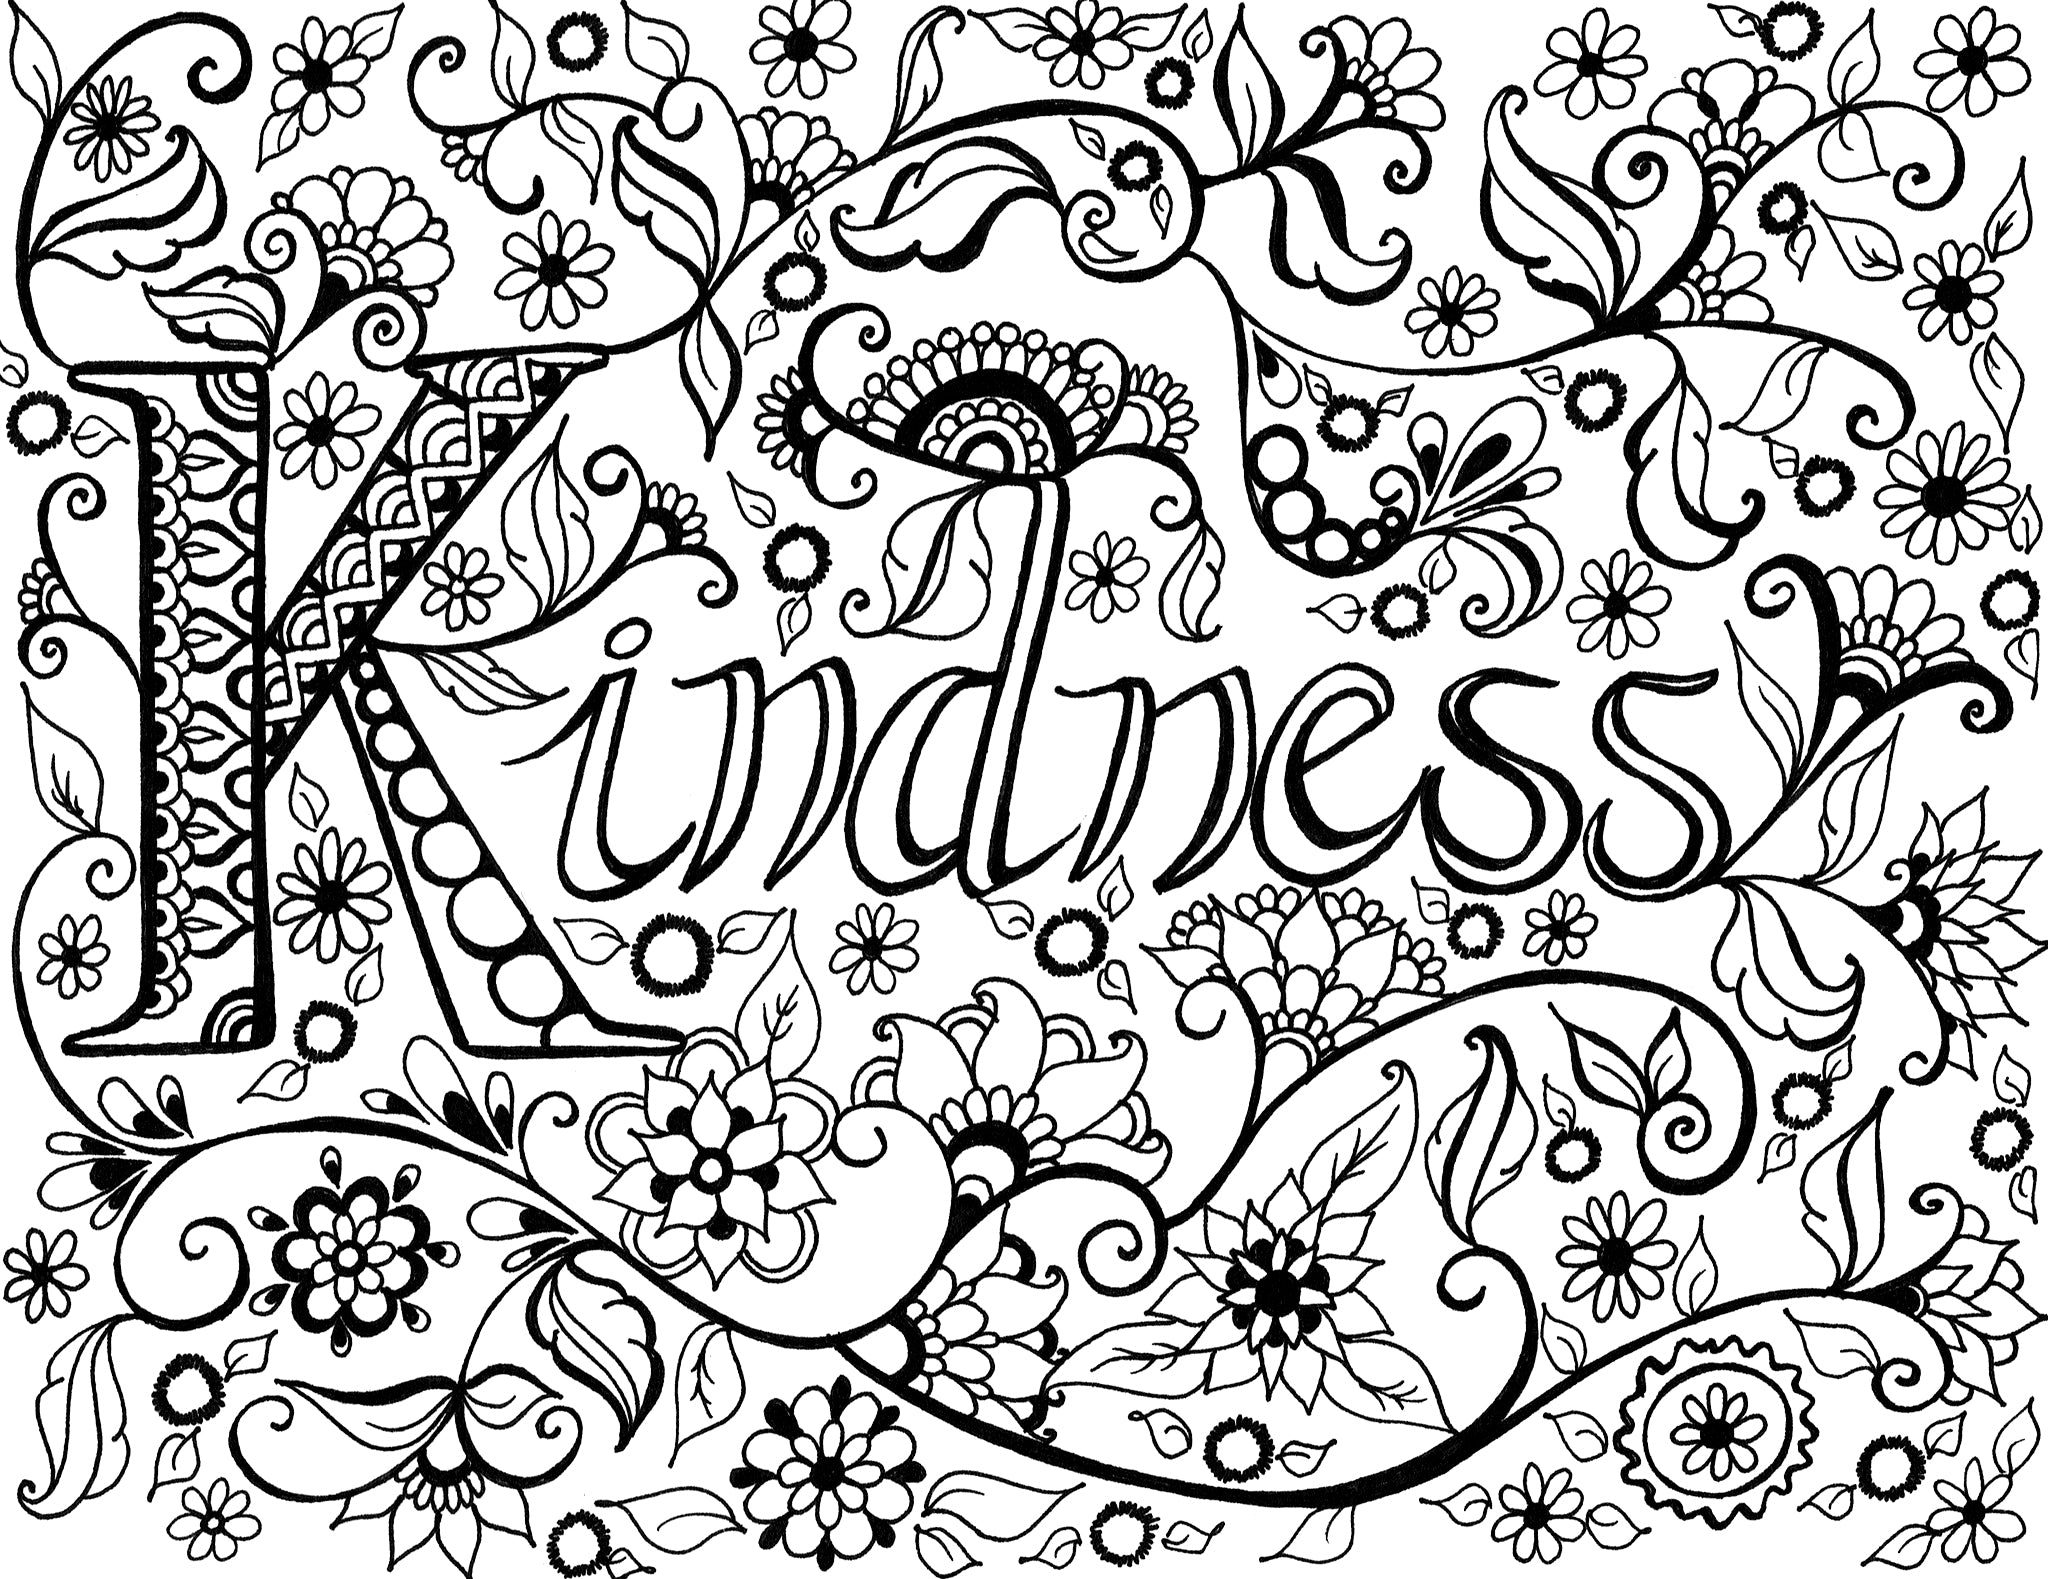 Kindness - You-Color